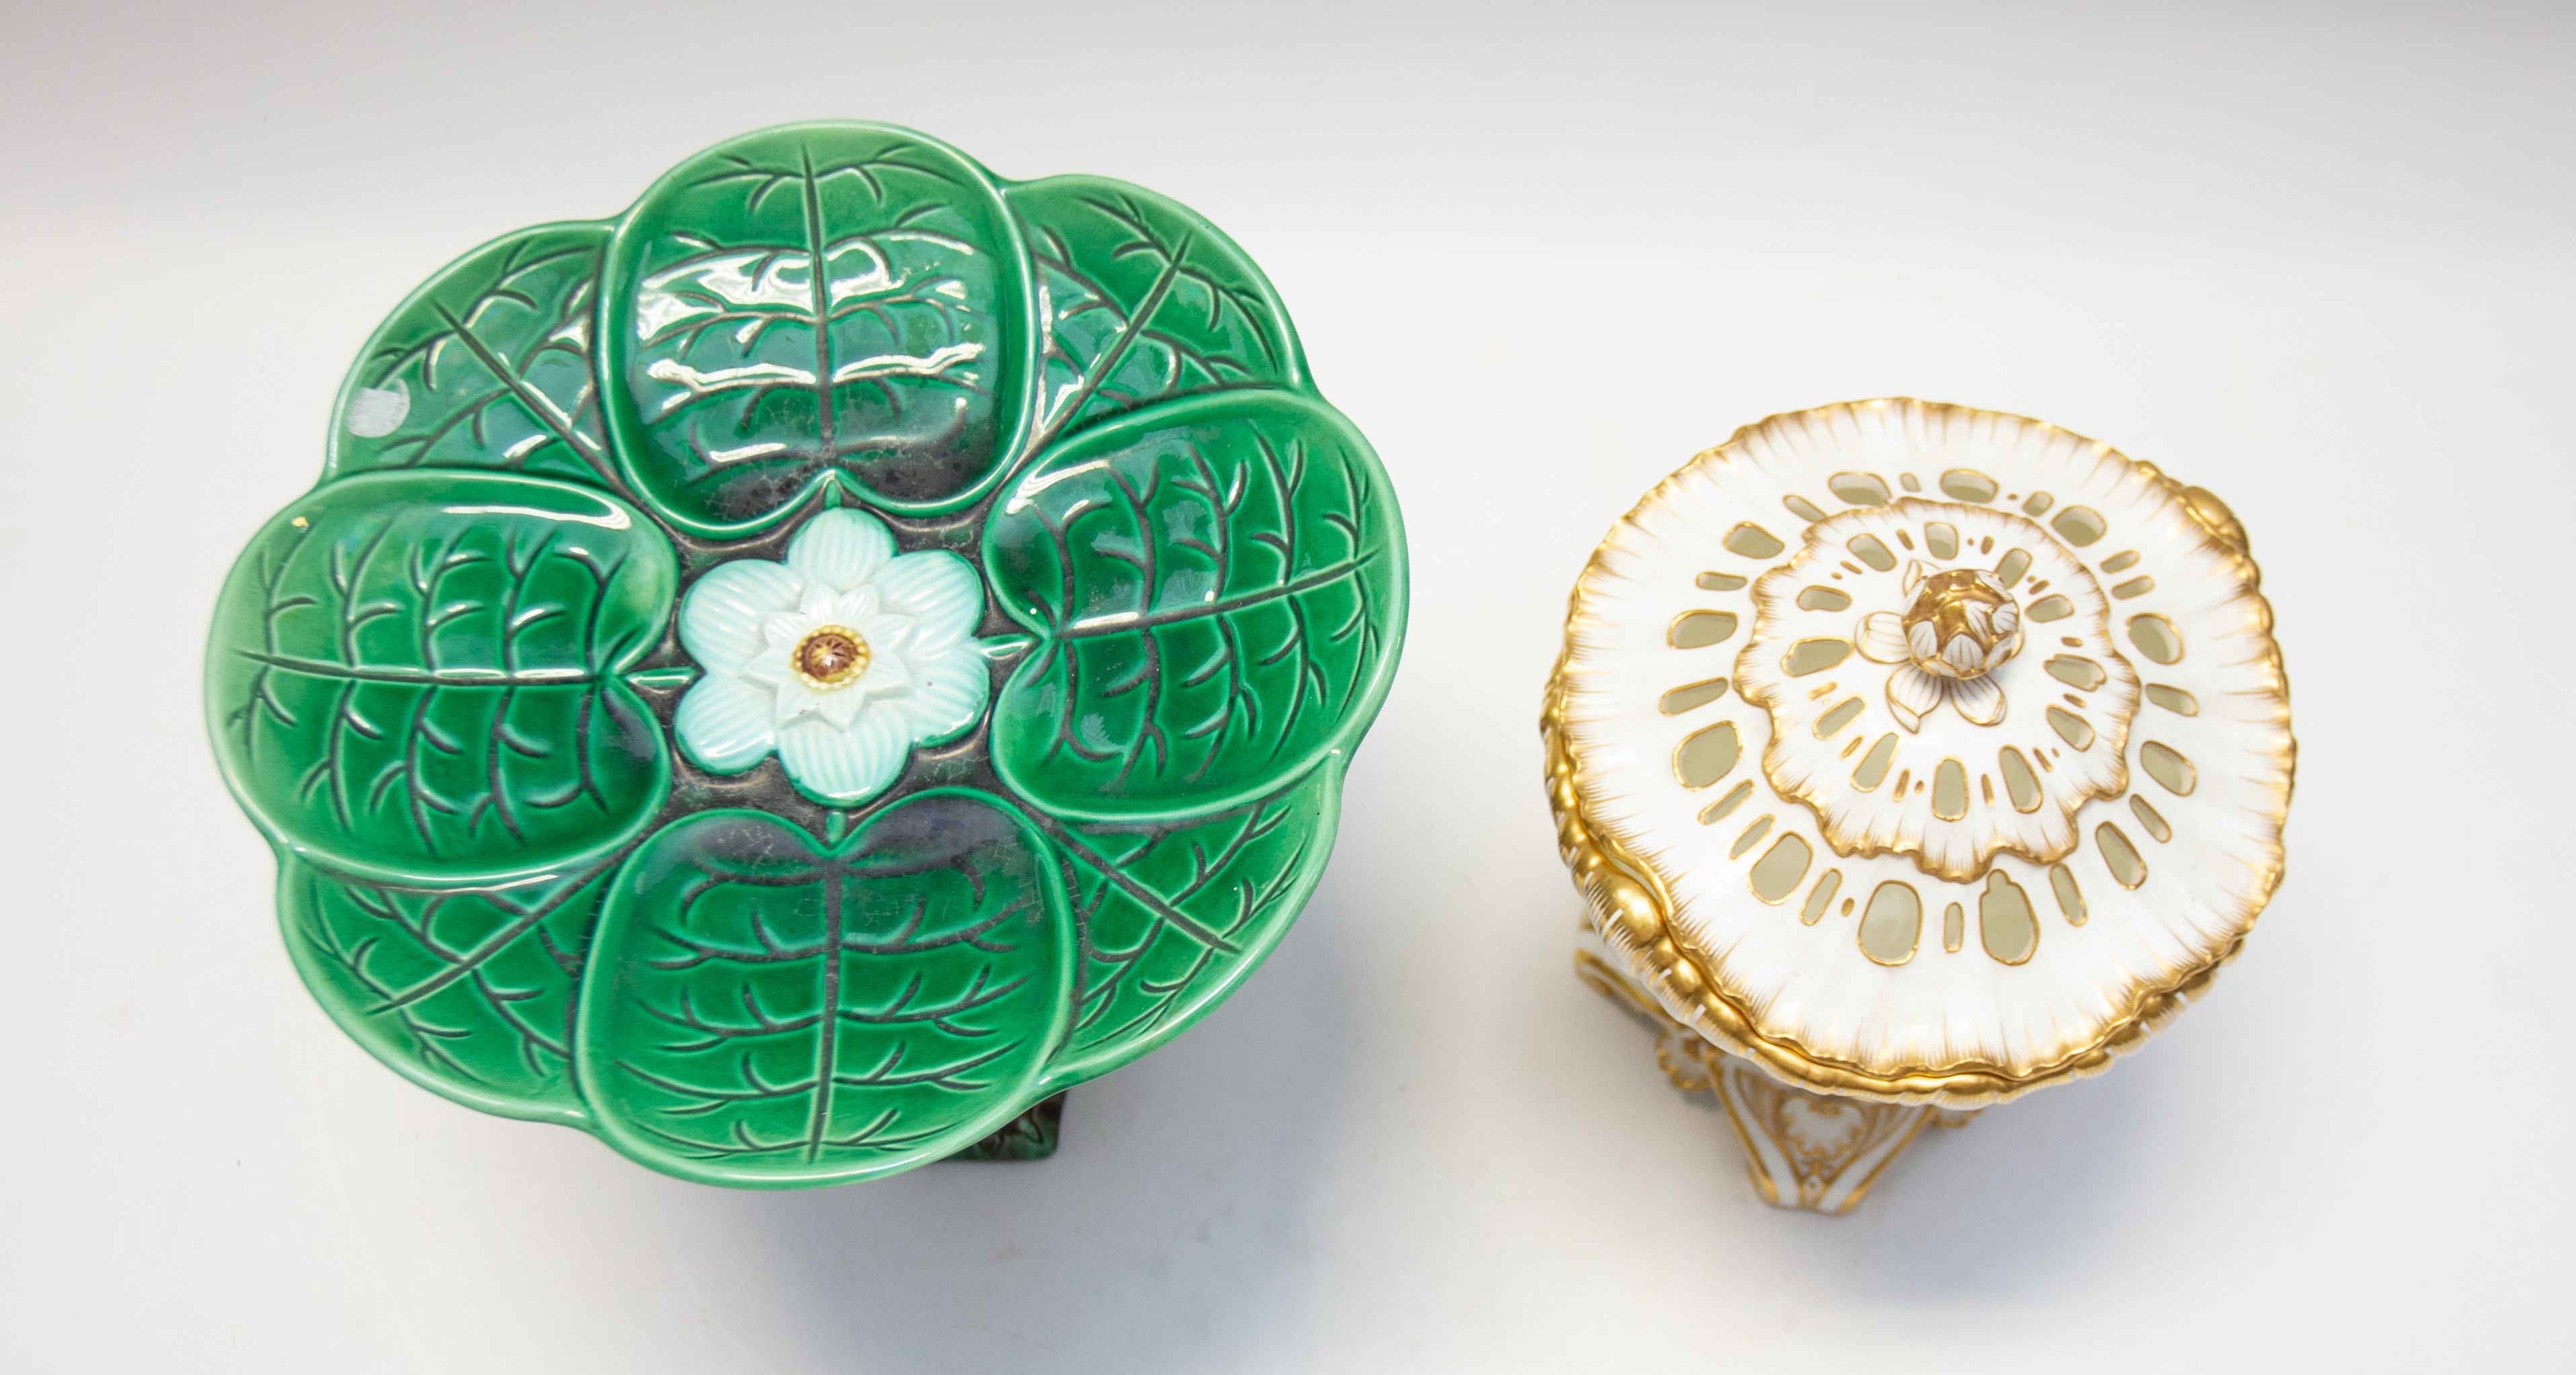 Majolica 19th century table comport with stork detail support along with Minton rose petal lidded - Image 2 of 4